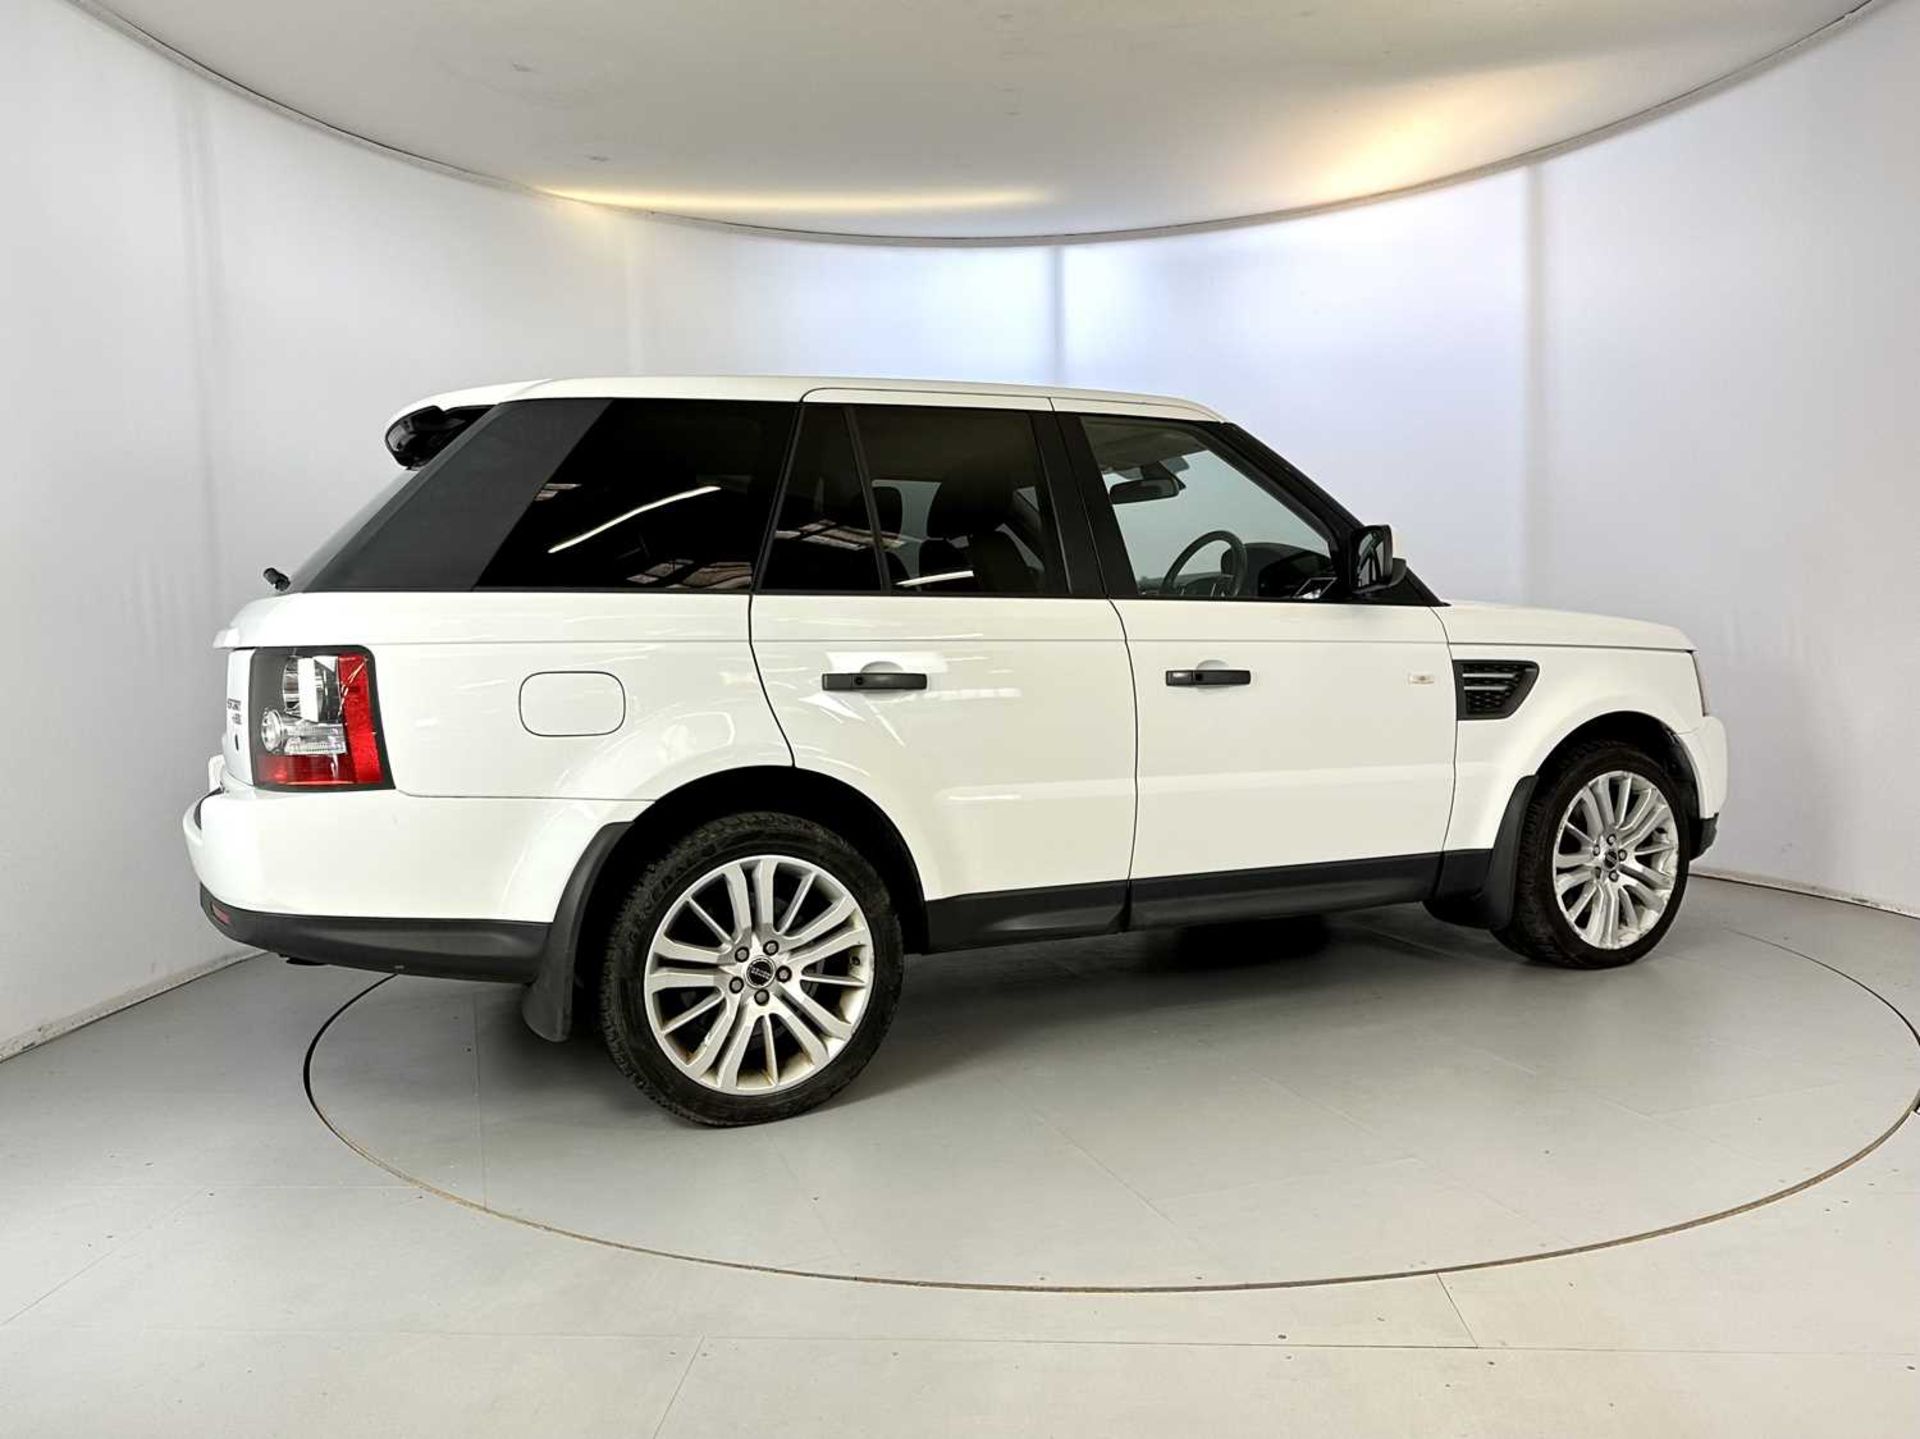 2010 Land Rover Range Rover Sport - Image 10 of 34